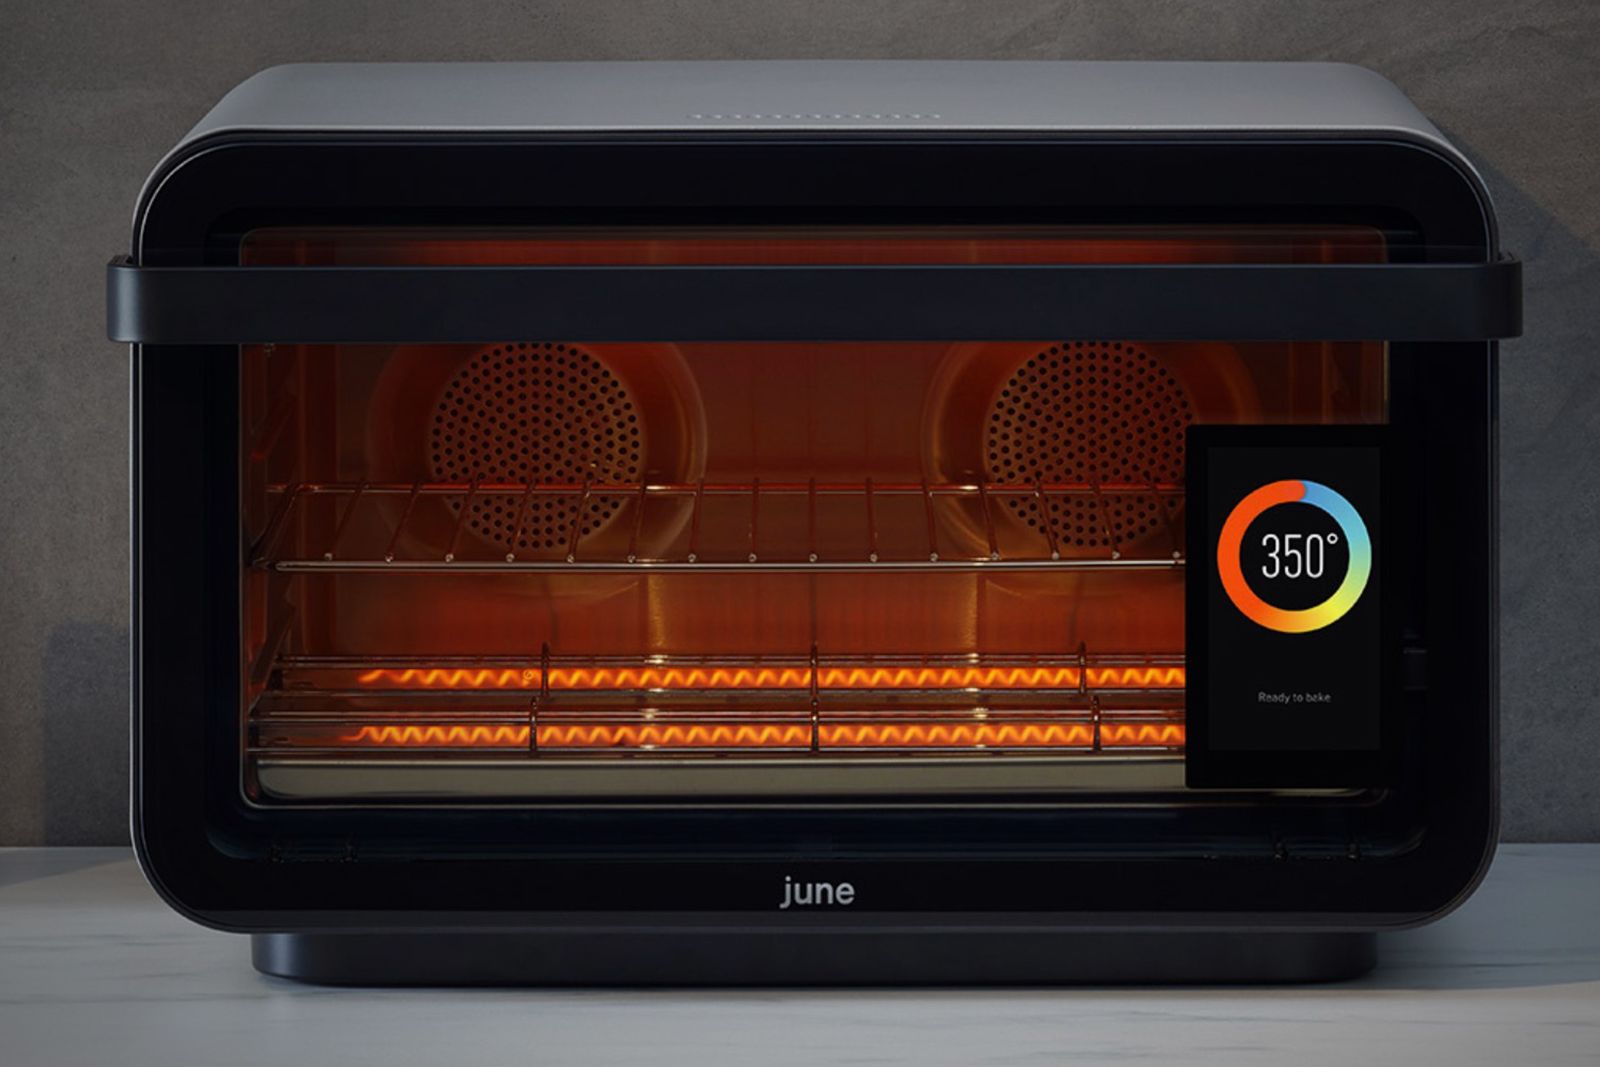 June is back with a new high-tech smart oven for your counter image 1